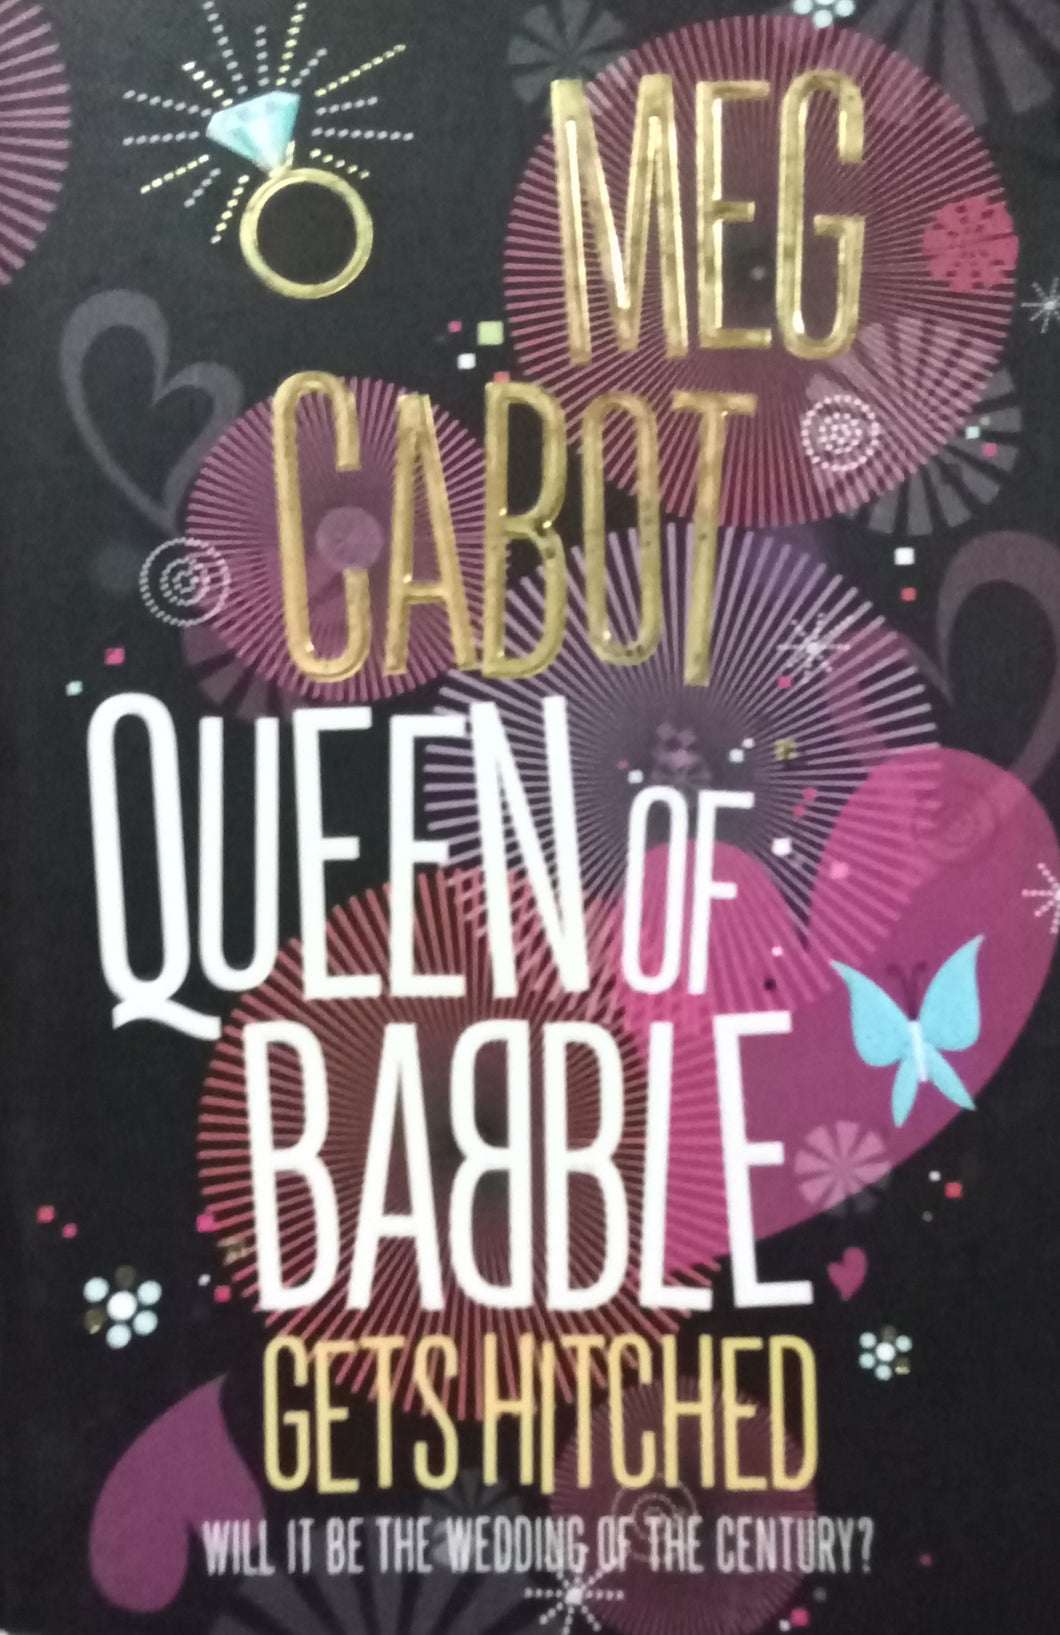 Queen Of Babble Getd Hitched by Meg Cabot